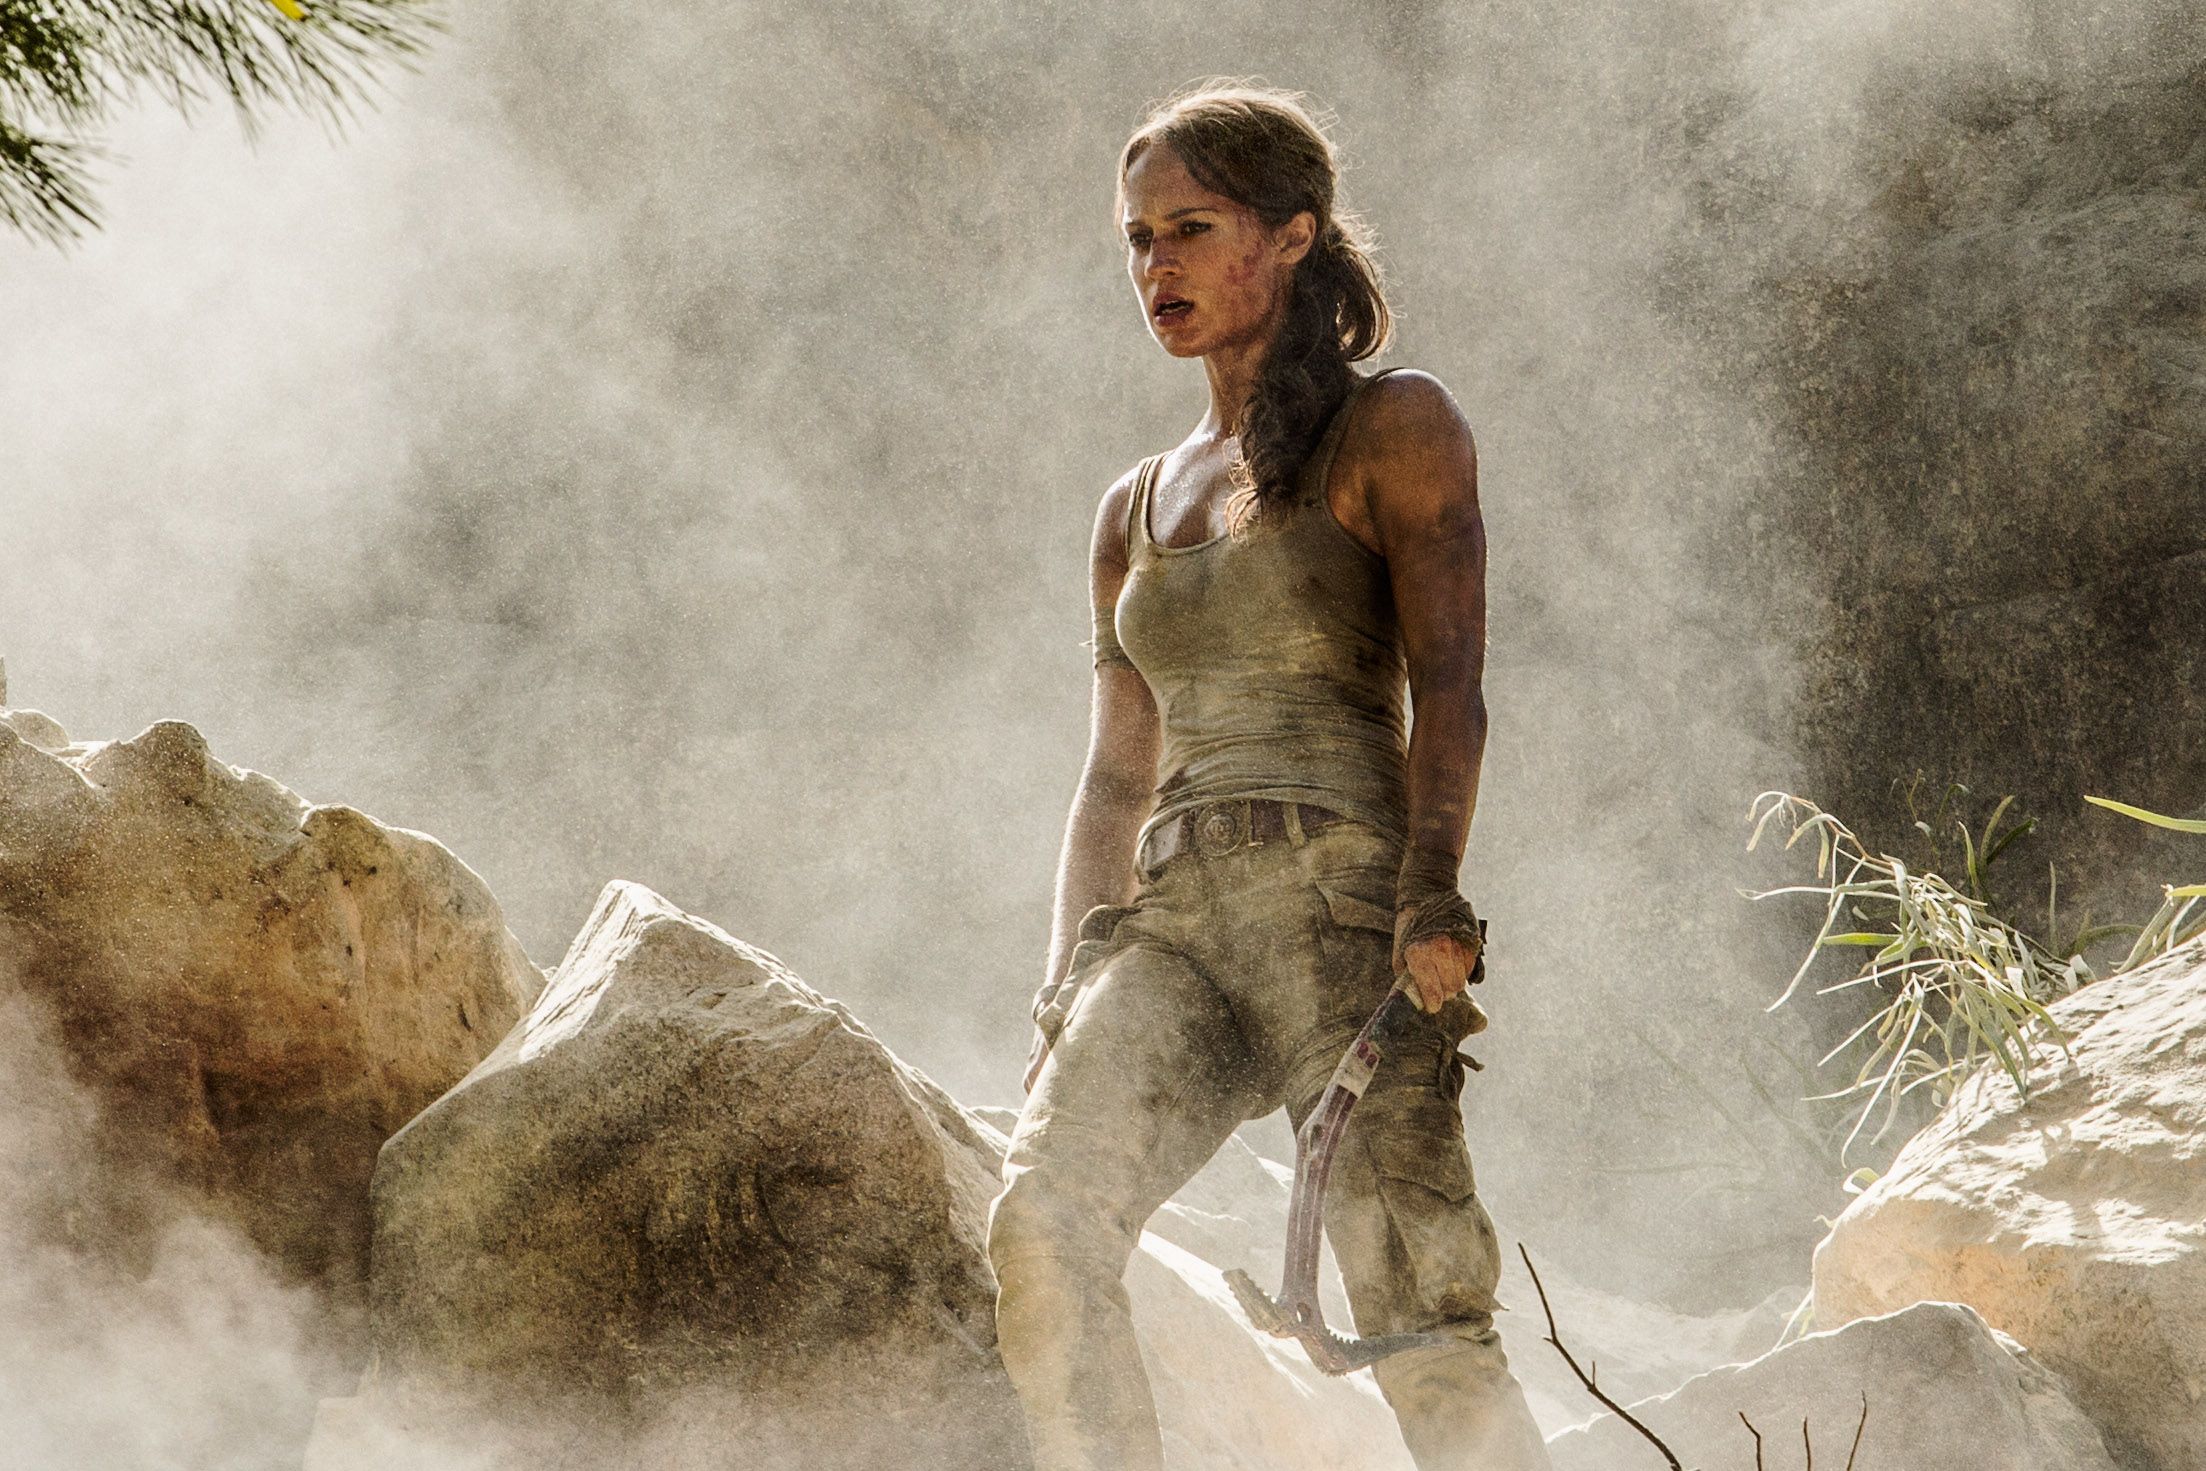 Tomb Raider 2 potential release date, cast and more